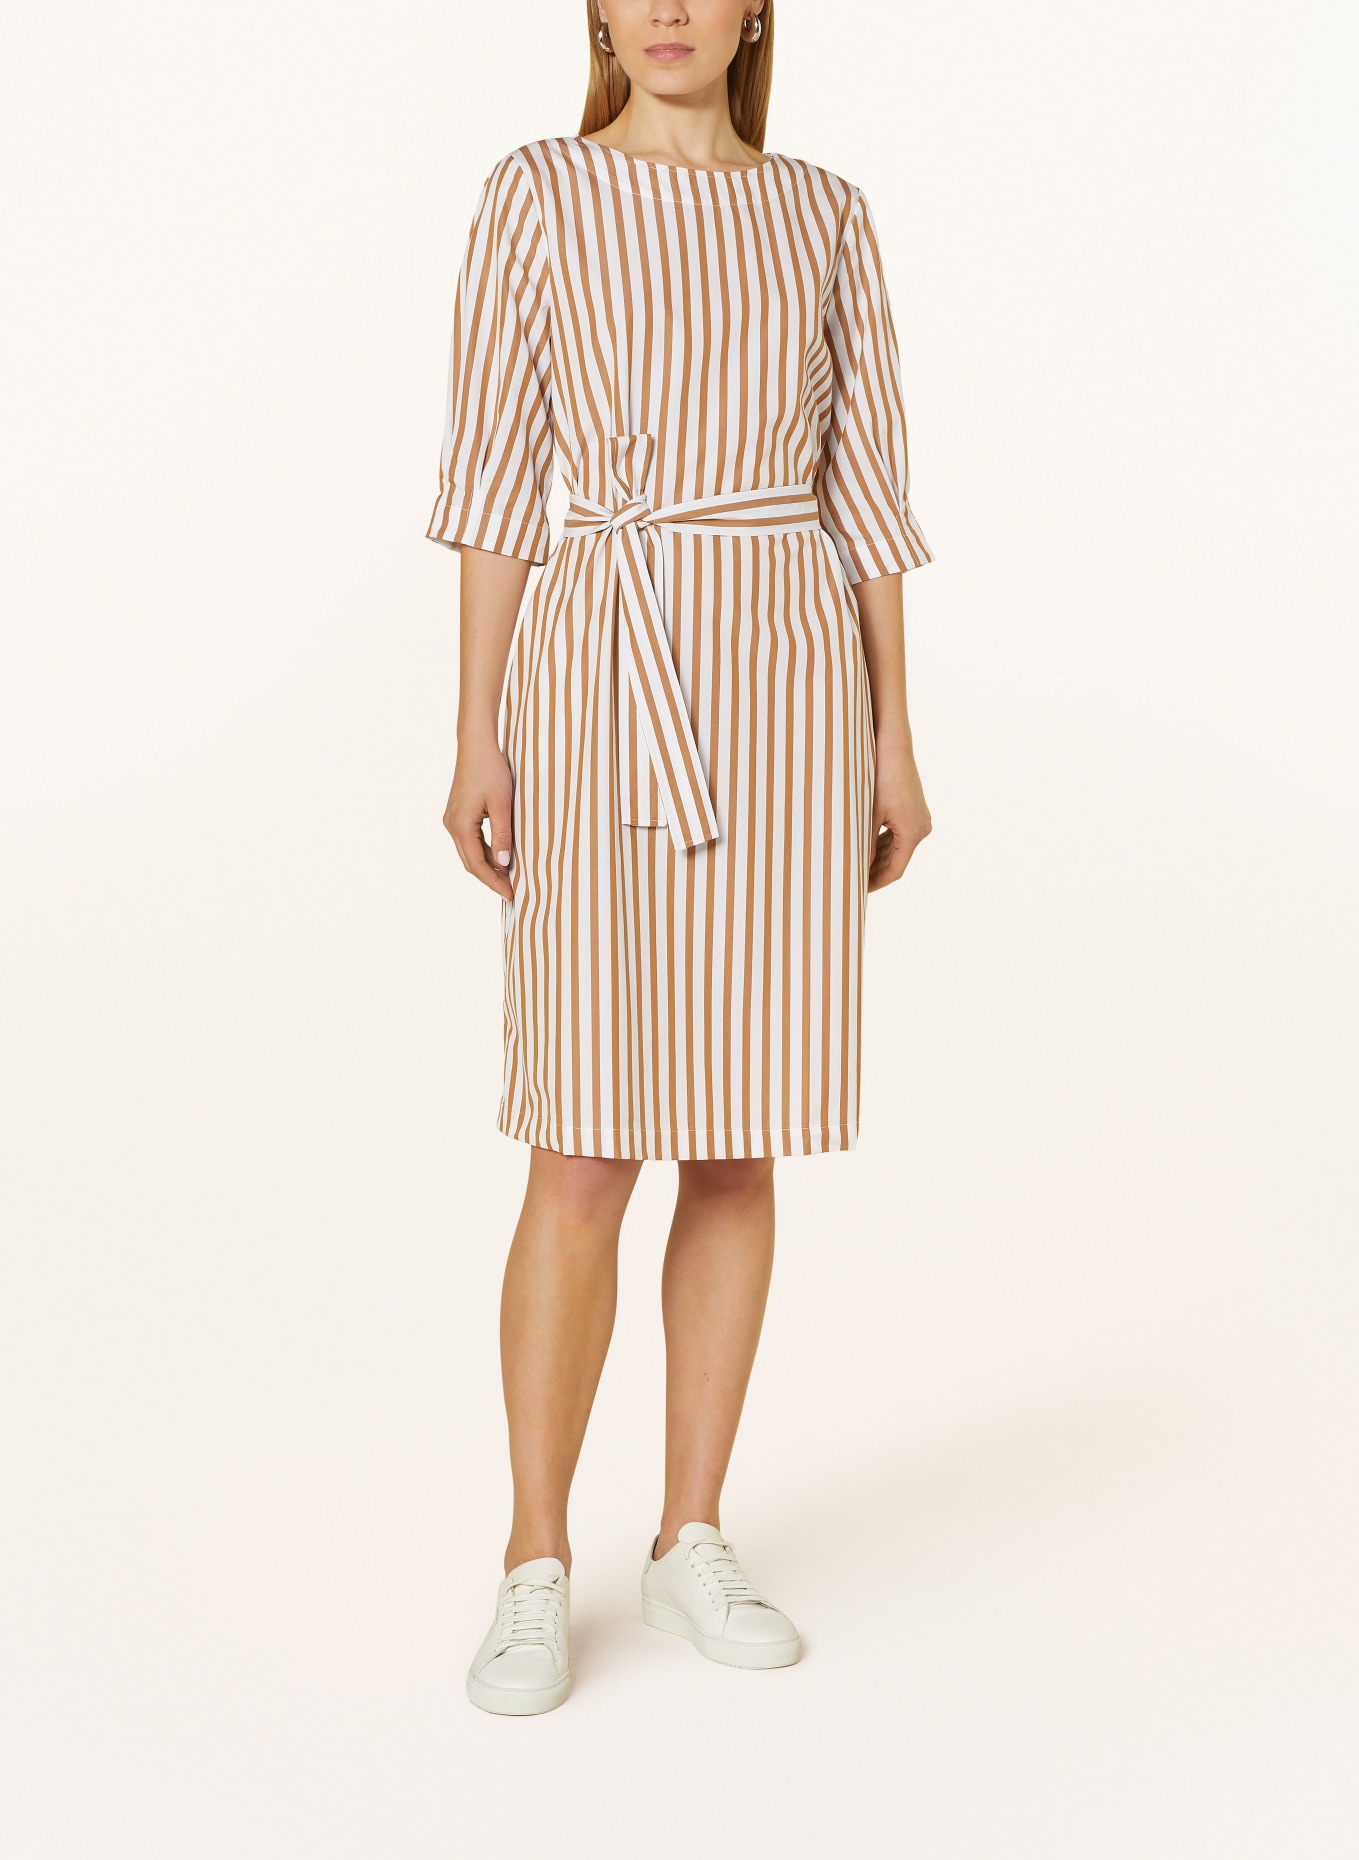 MAERZ MUENCHEN Dress with 3/4 sleeves, Color: COGNAC/ WHITE (Image 2)